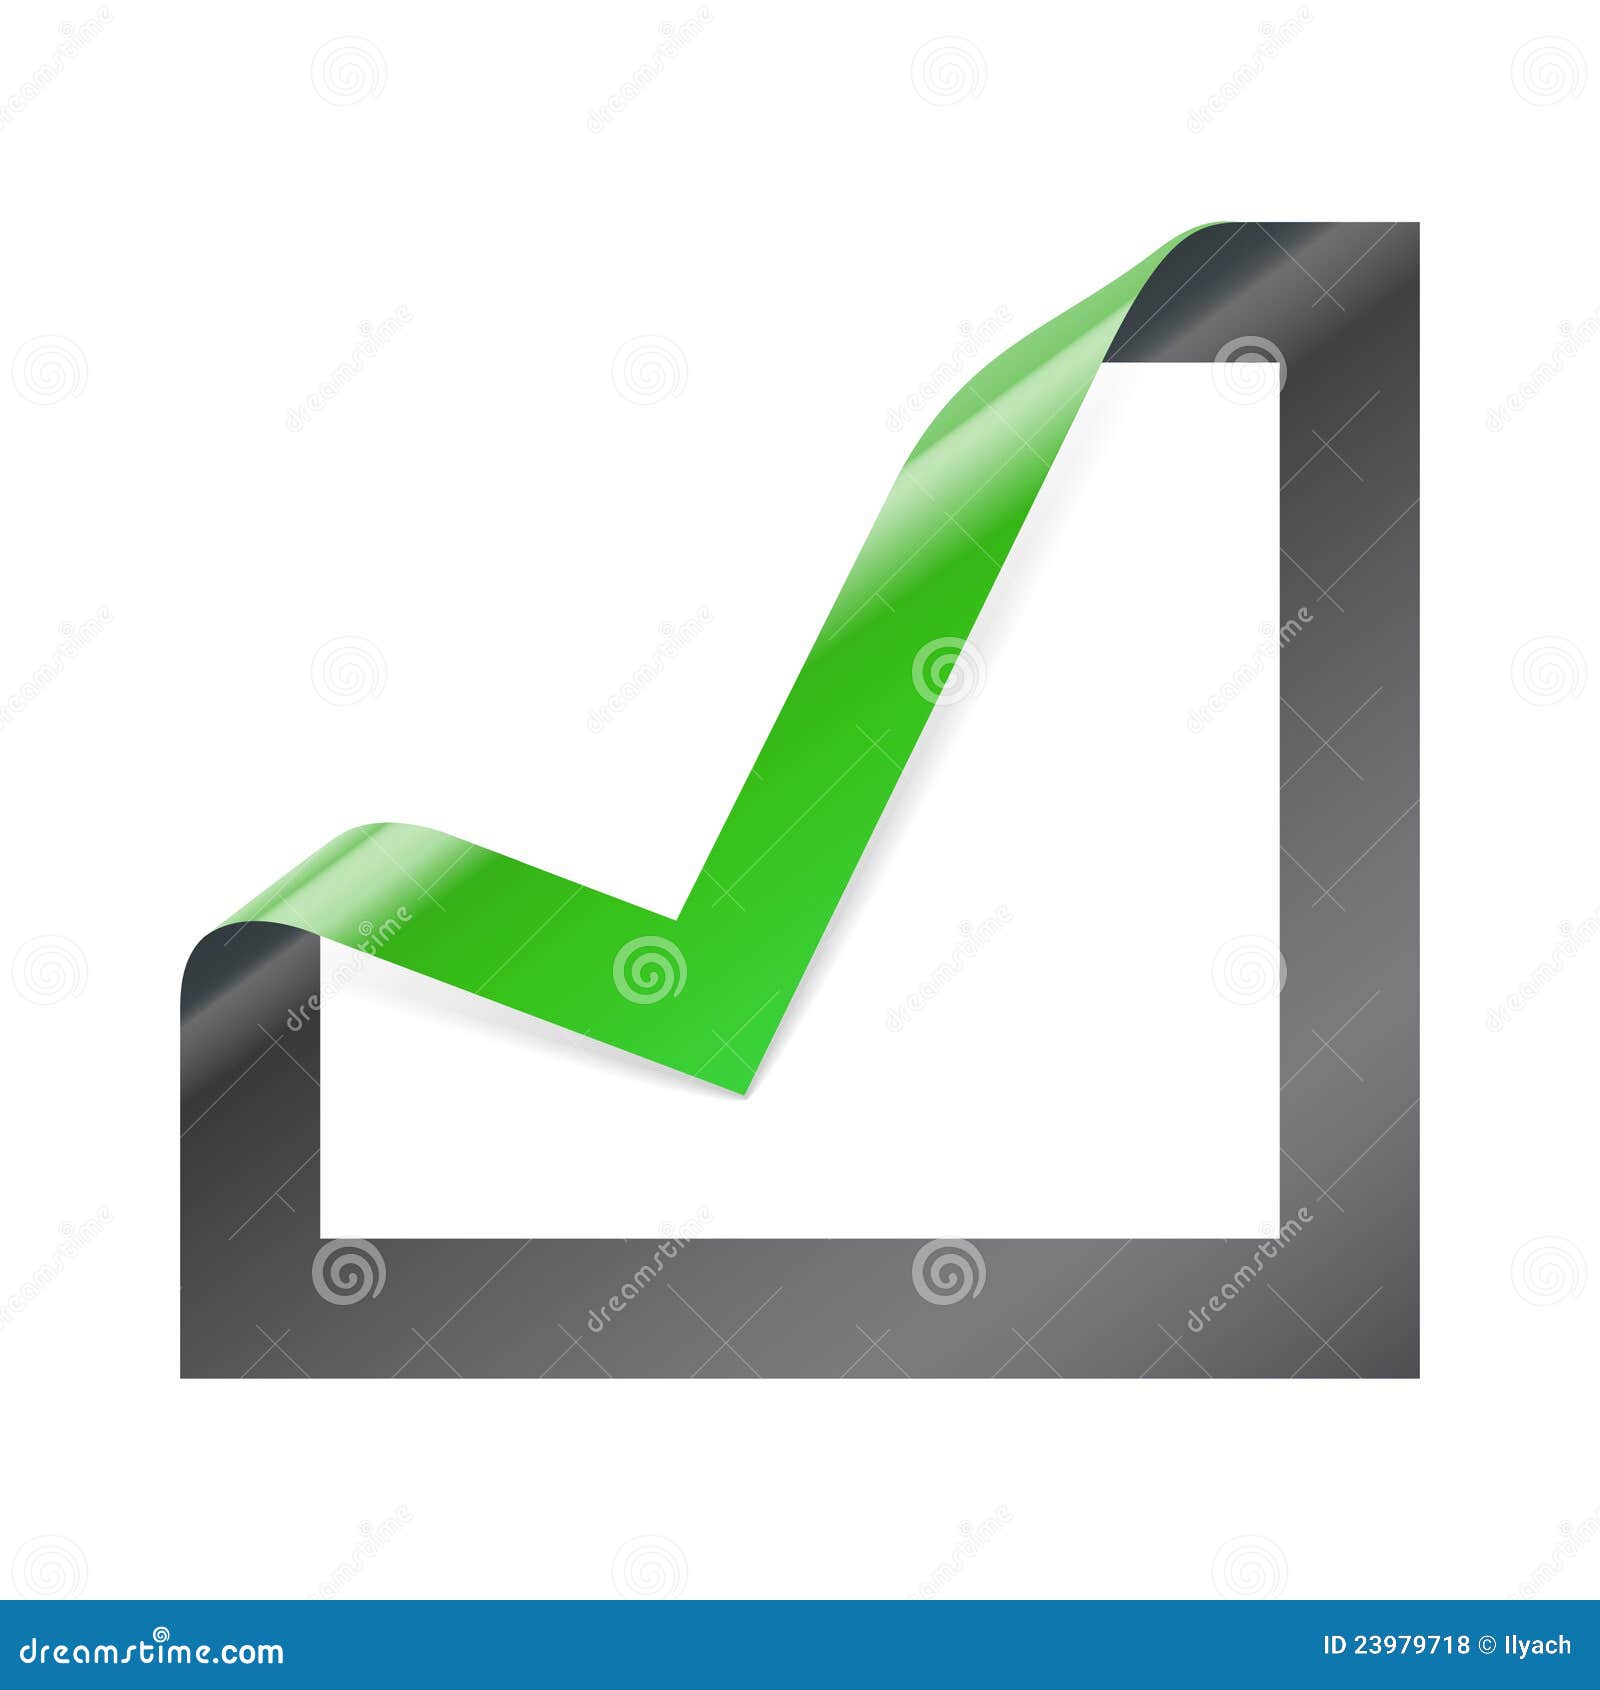 checkbox icon with angle folded